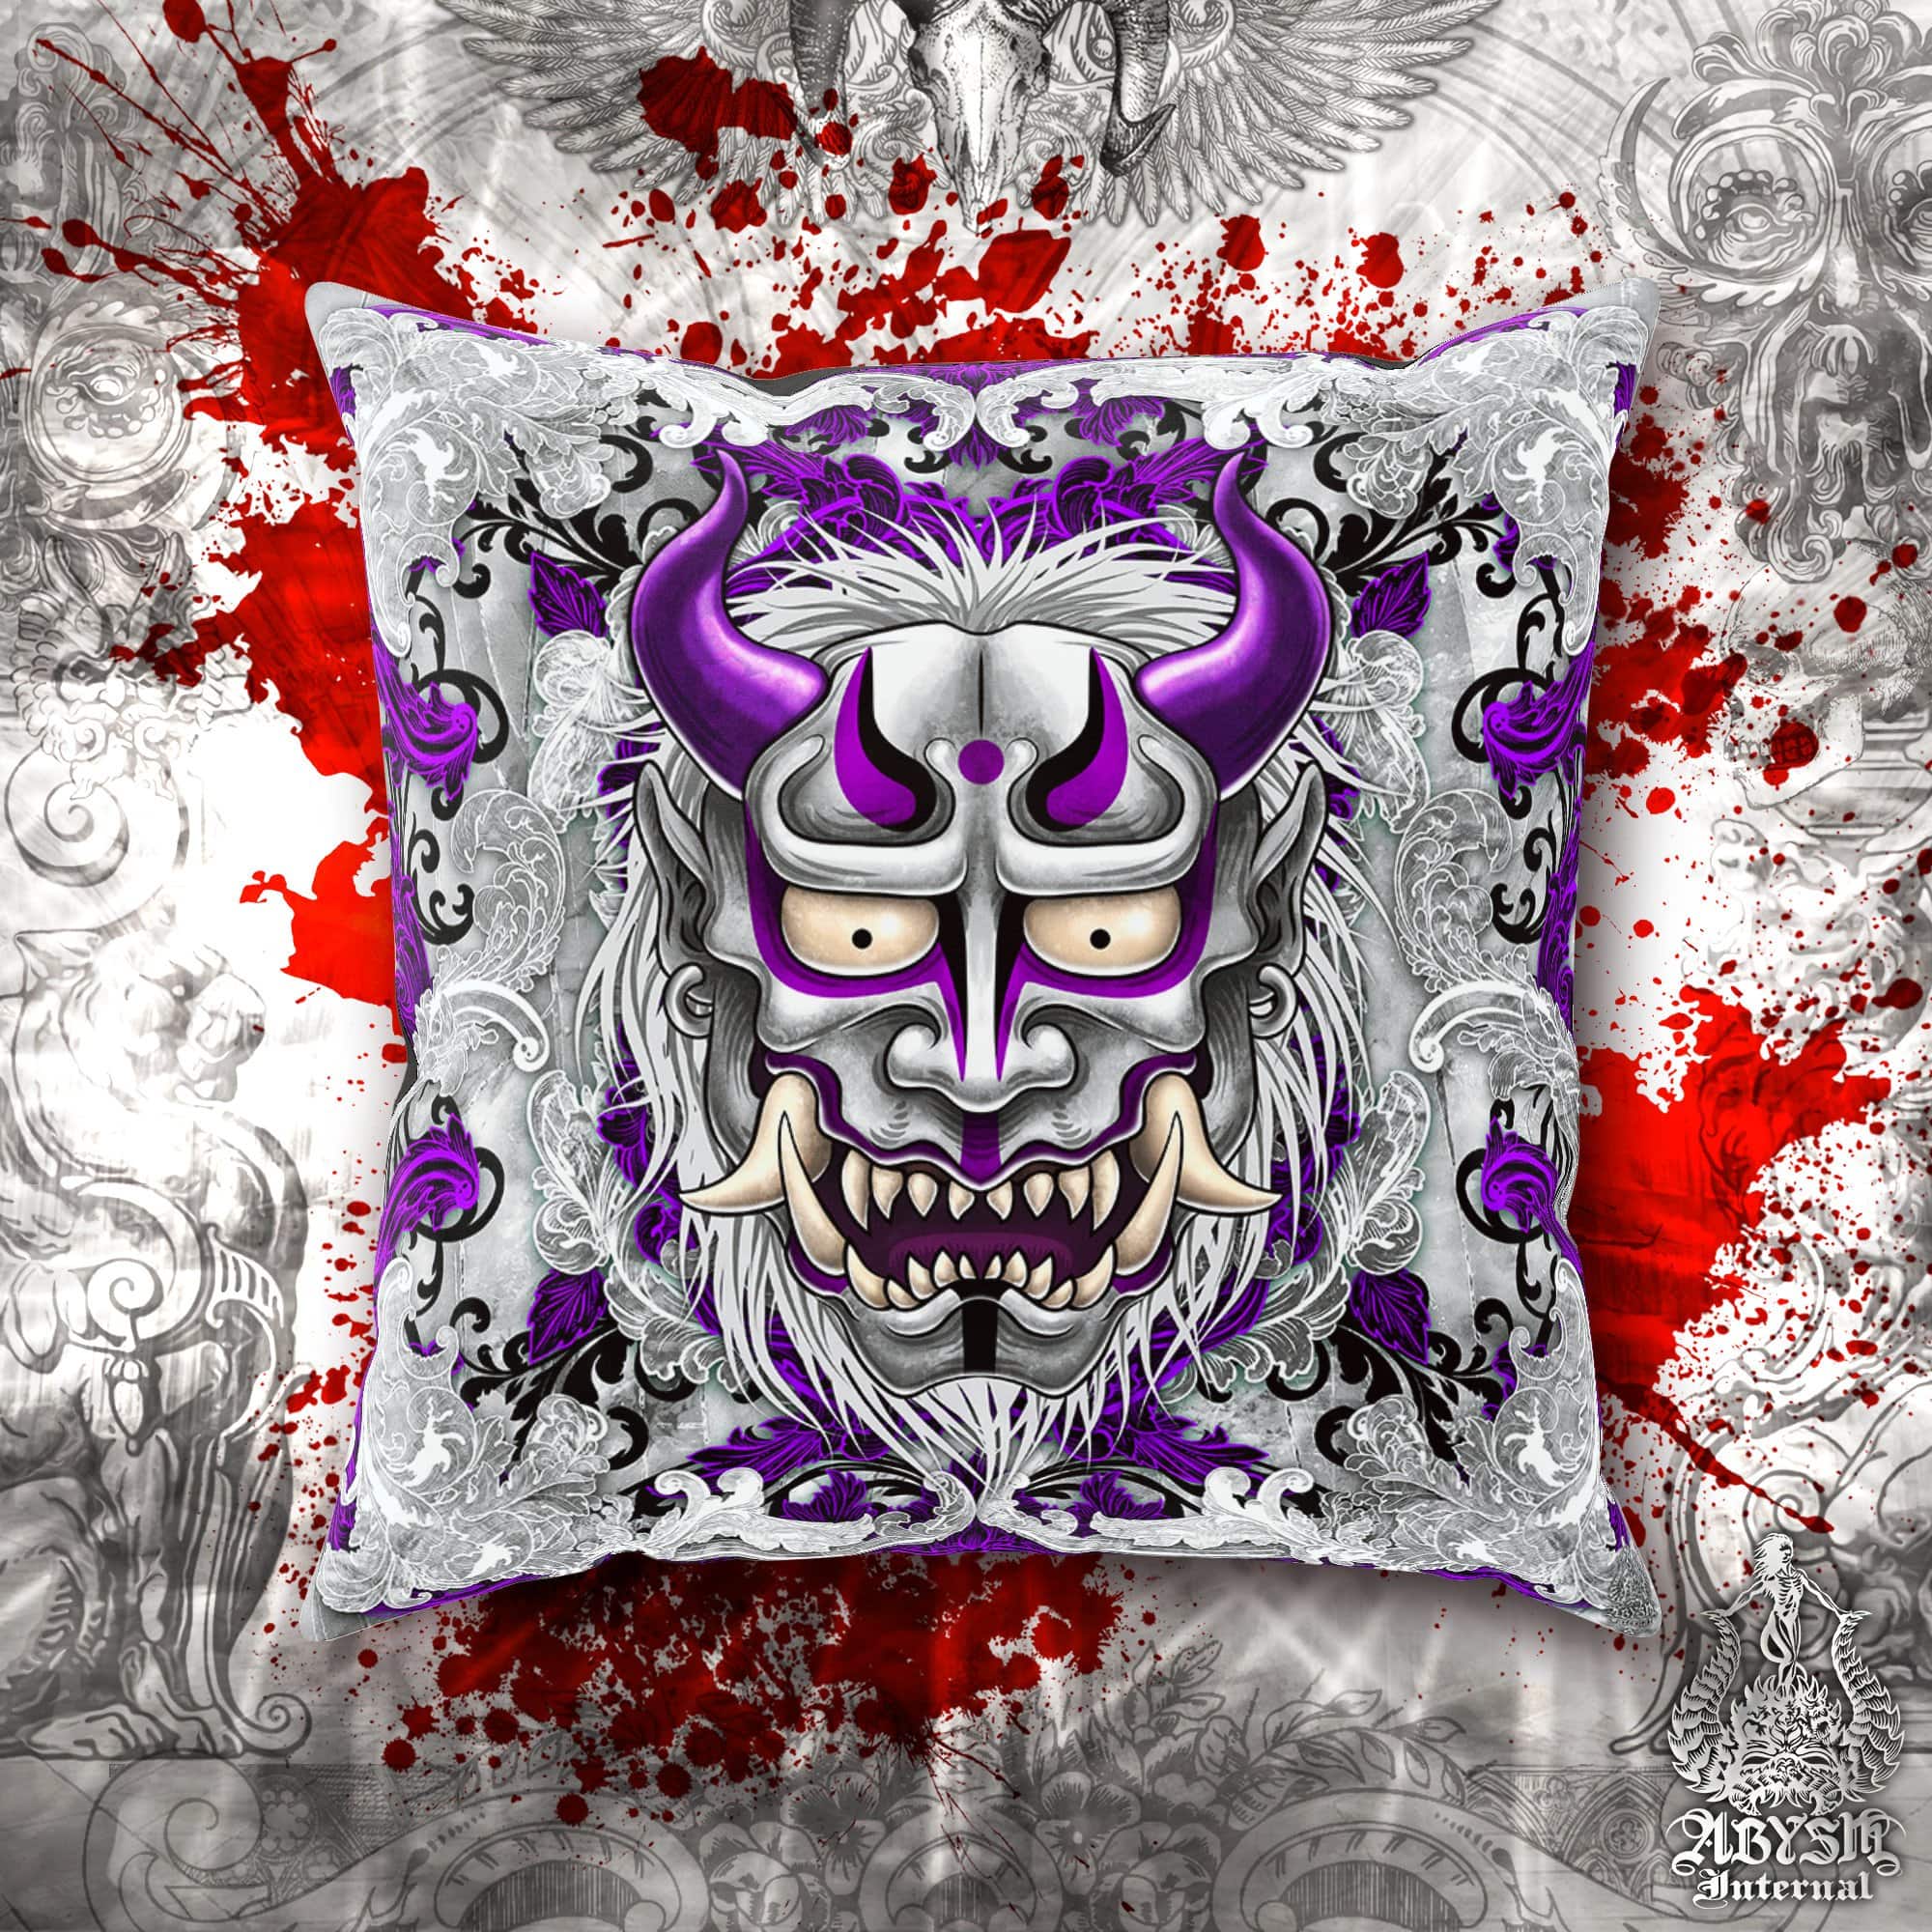 Pastel Goth Throw Pillow, Decorative Accent Pillow, Square Cushion Cover,  Alternative Anime and Gamer Home Decor, Japanese Demon - Black & Purple Oni